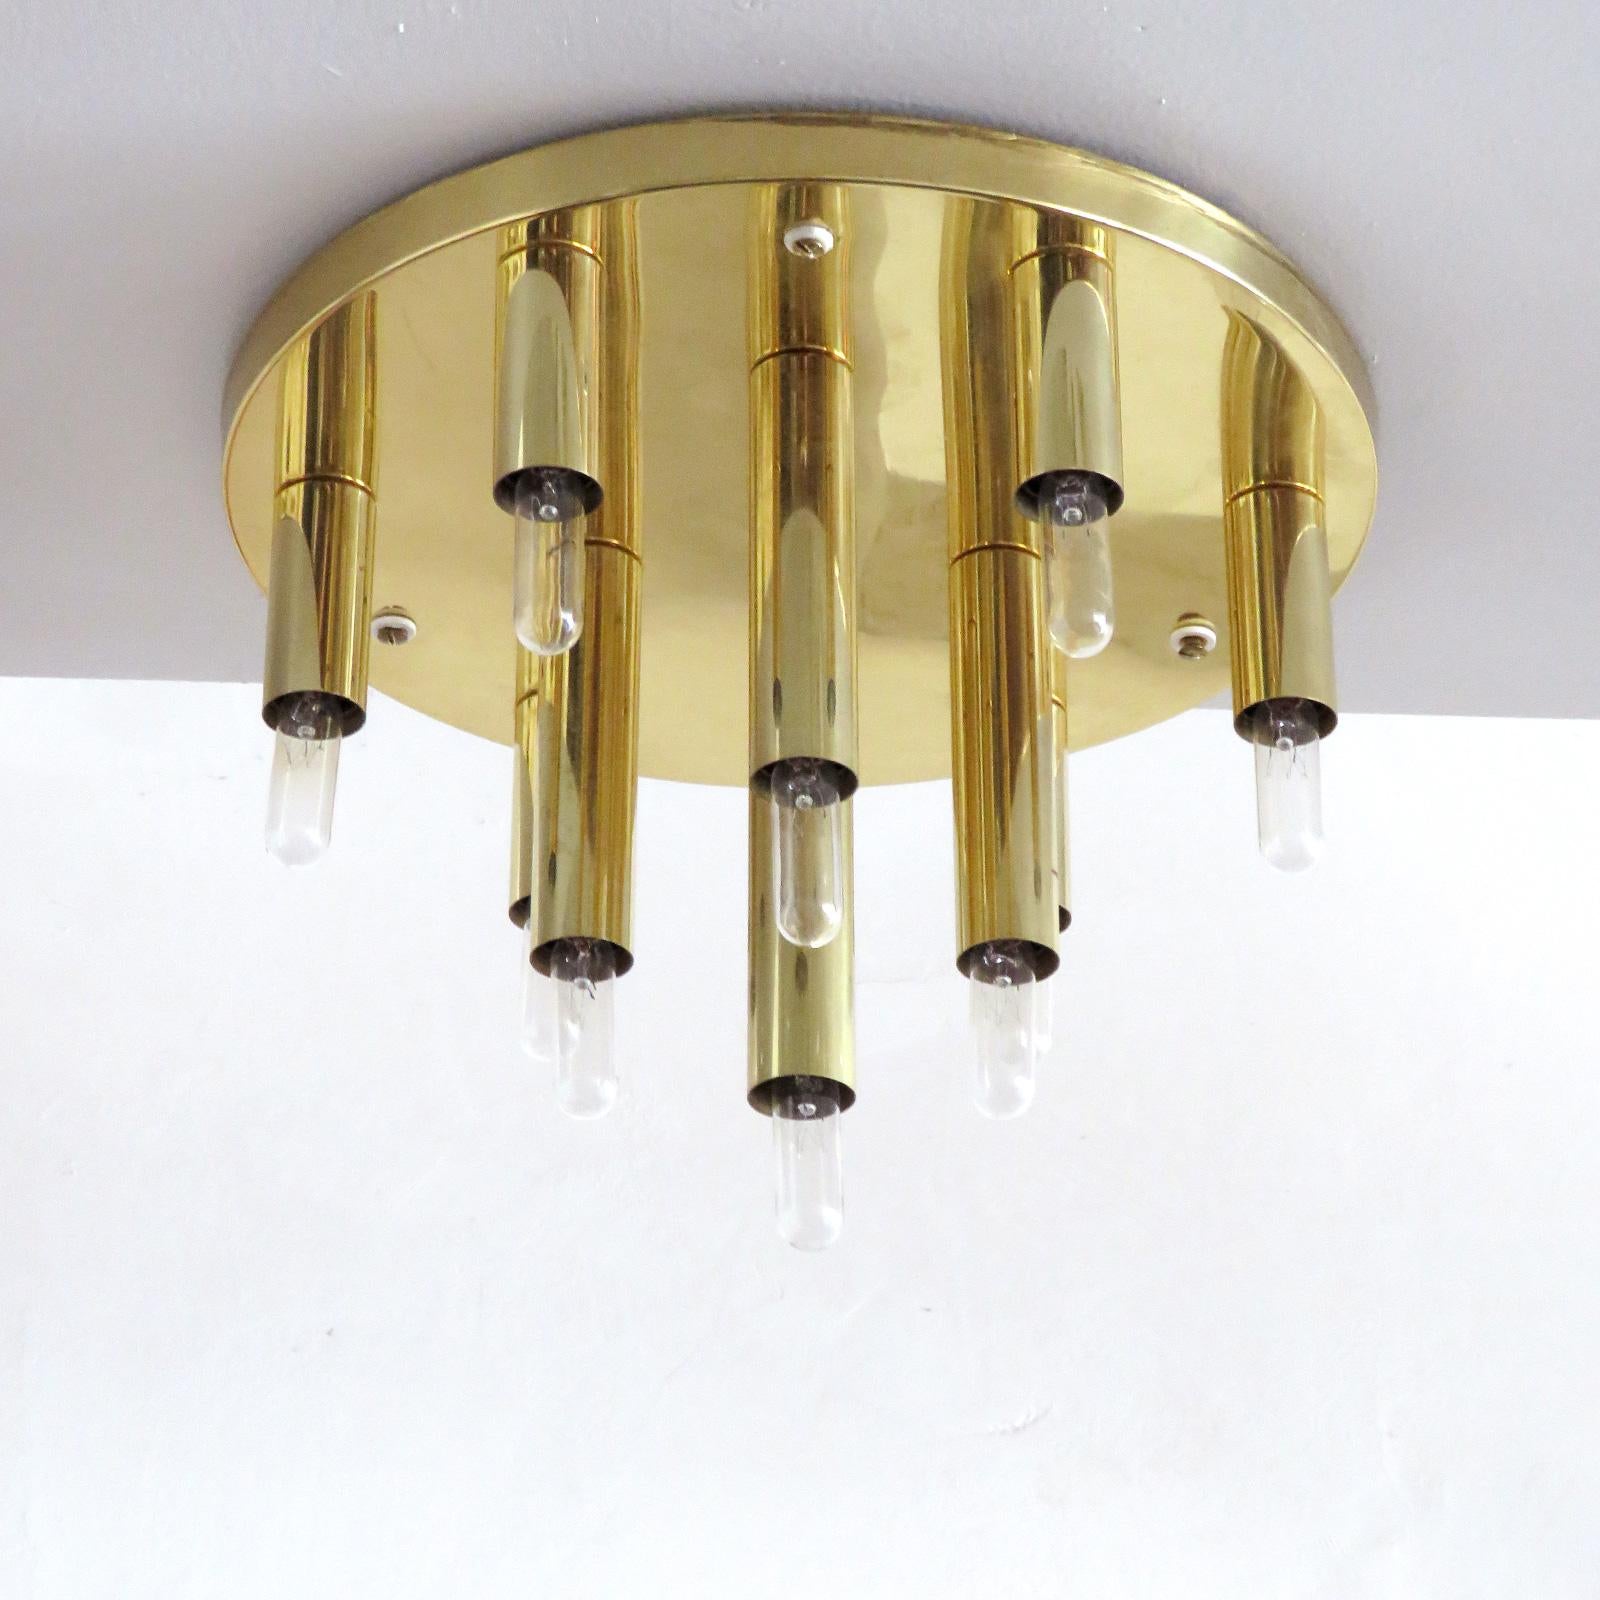 Stunning circular ten-light flush mount light panel in brass by Soelken Germany, can be used as wall light as well